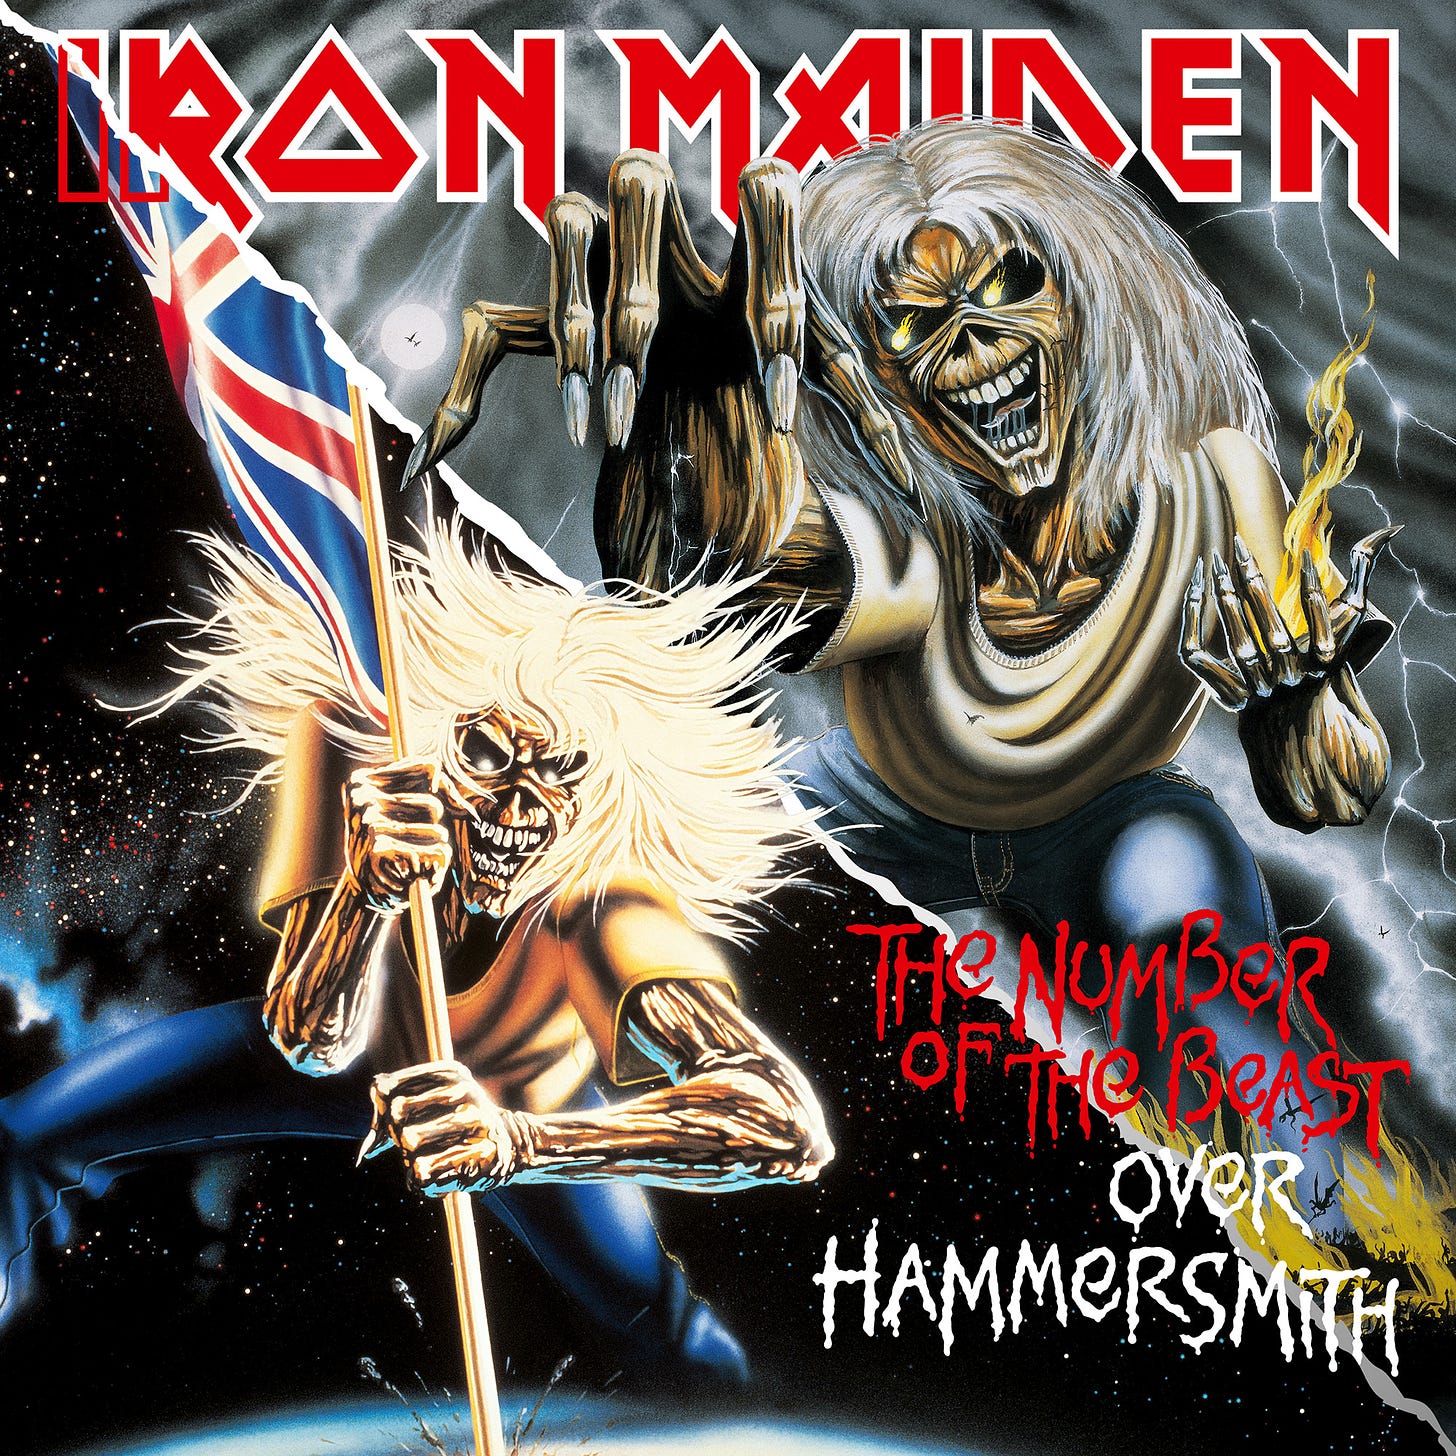 X \ Iron Maiden على X: "Scream for me Hammersmith!!! The Number Of The  Beast &amp; Beast Over Hammersmith is OUT NOW! Order here -  https://t.co/iJvaQLiKiU #IronMaiden #TNOTB #BOH #Album  https://t.co/IvAMttN4MU"